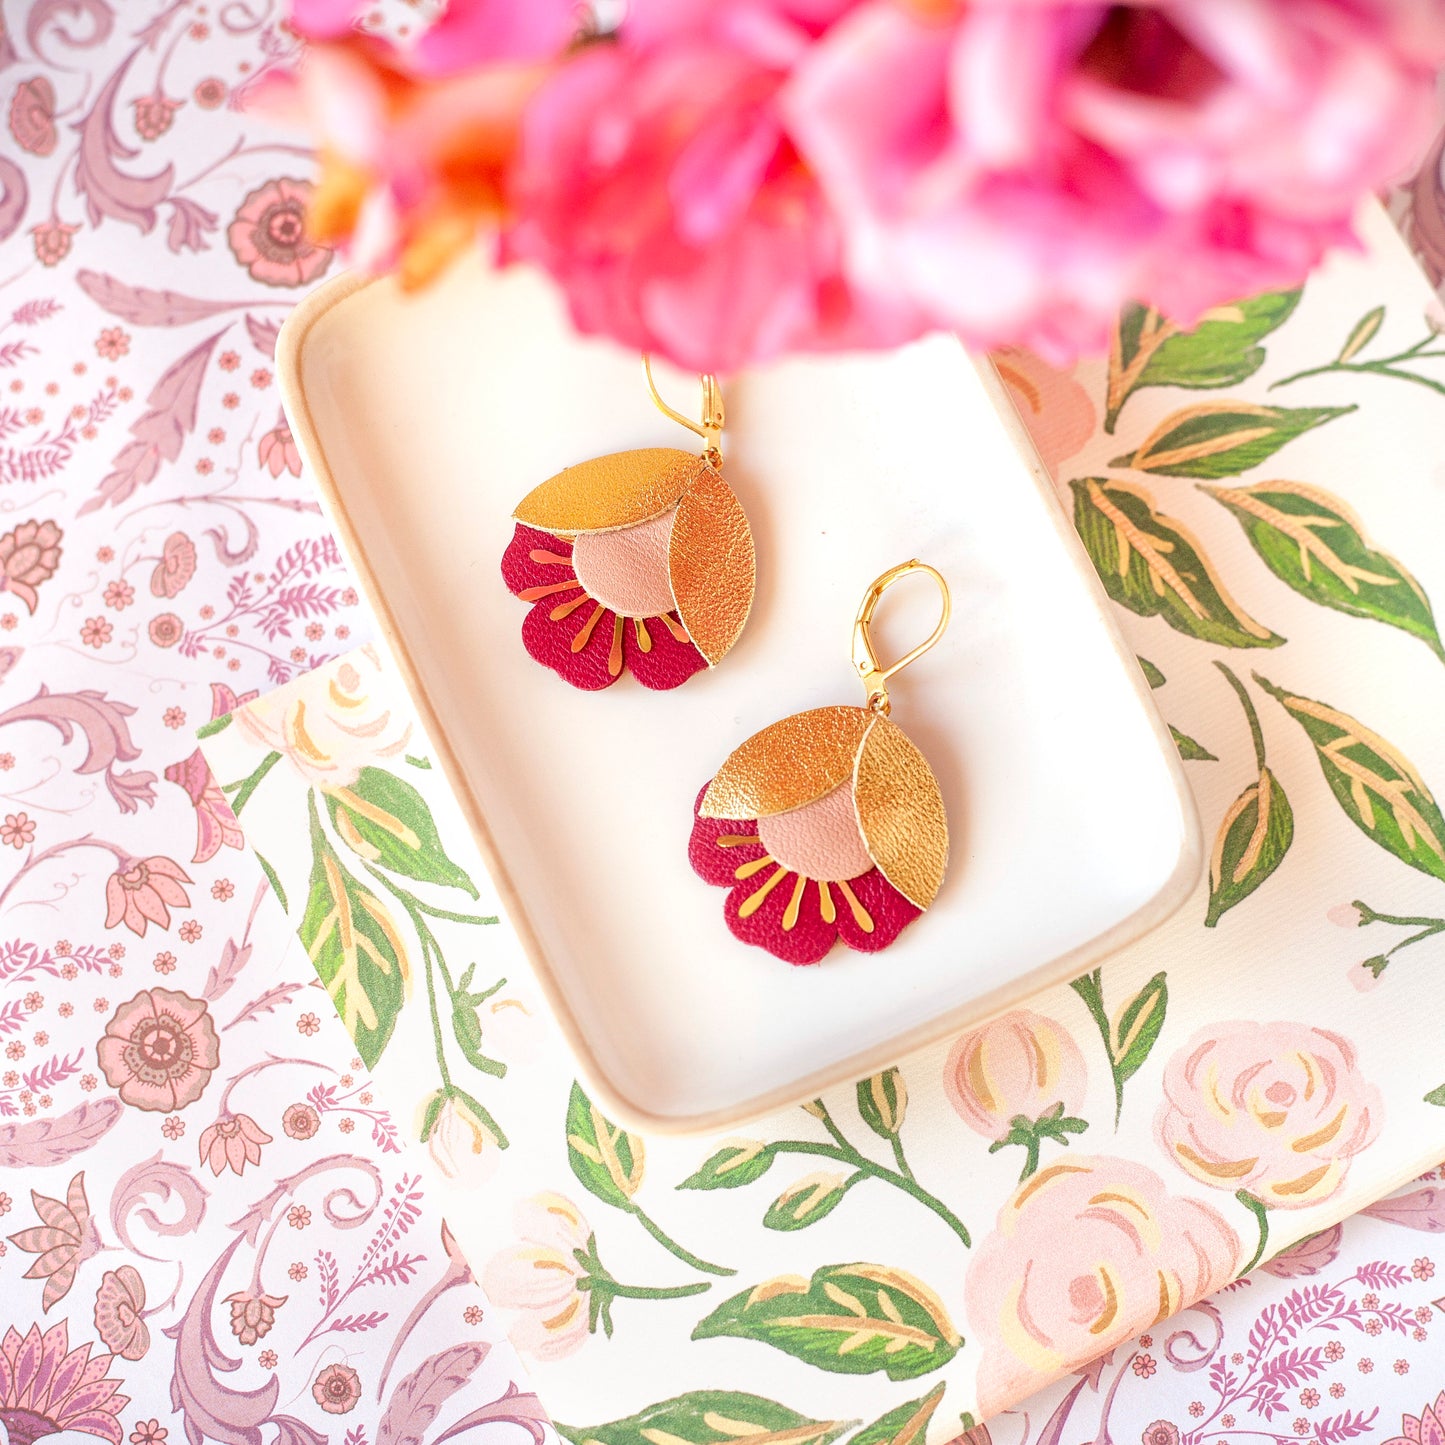 Cherry blossom earrings in pink and plum gold leather